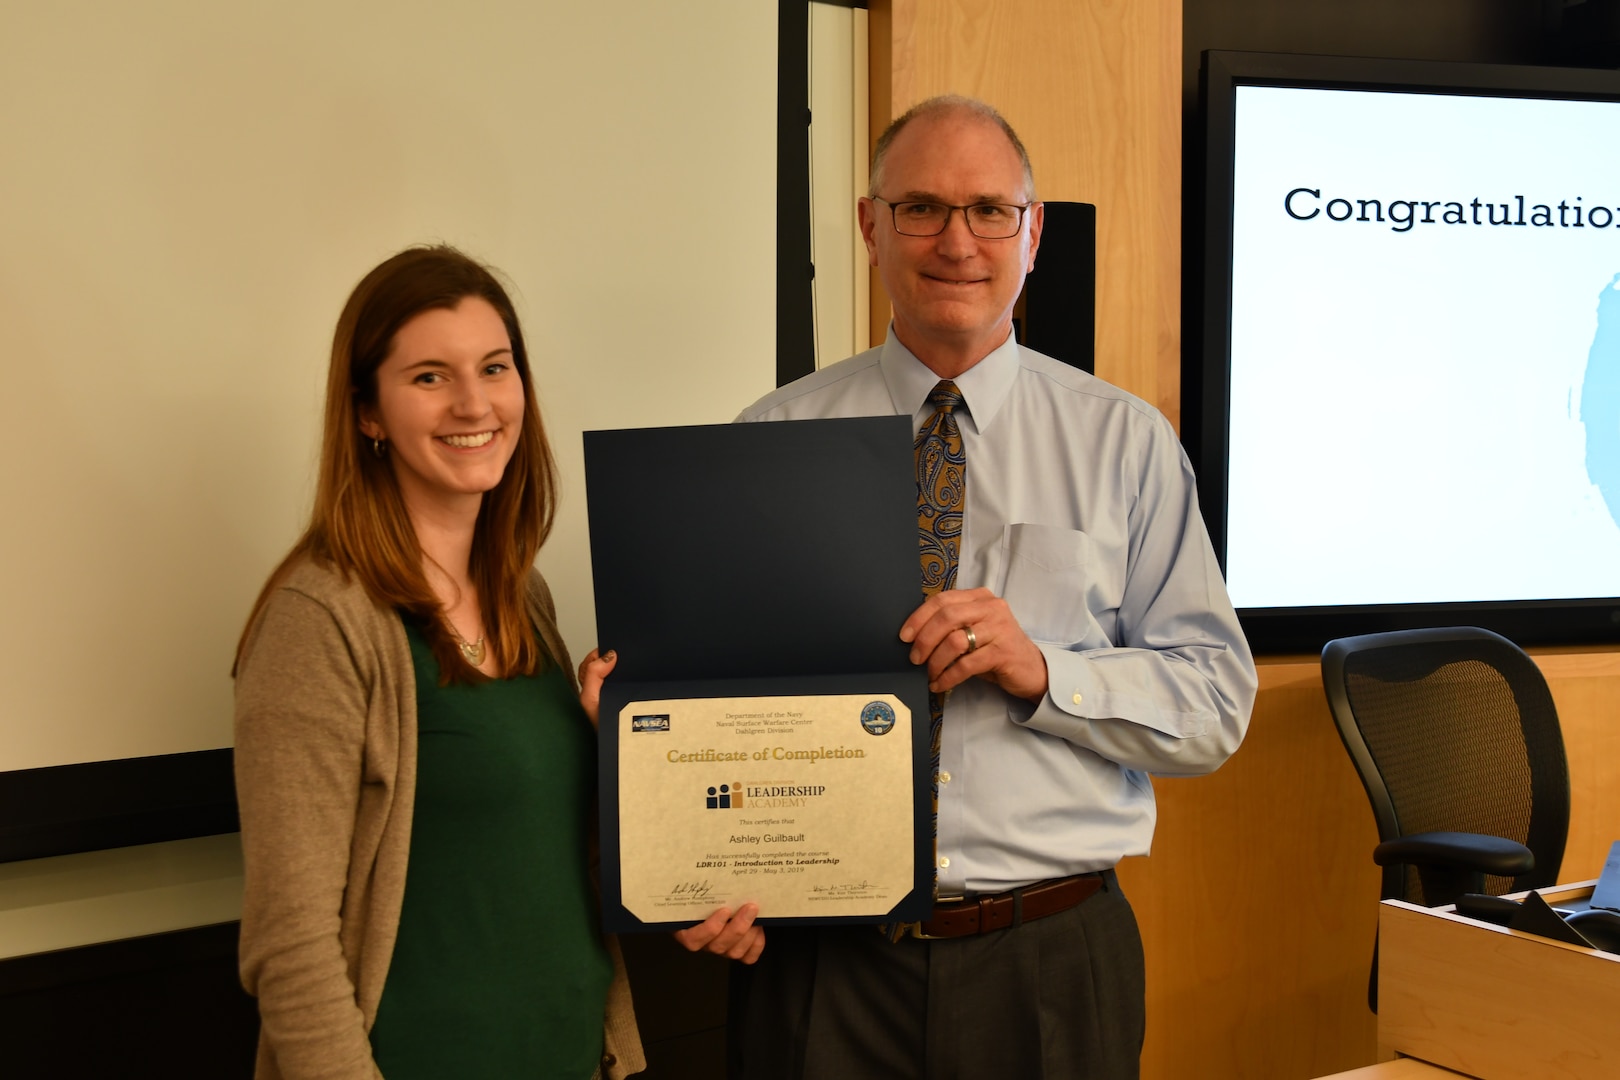 IMAGE: Gill Goddin, Naval Surface Warfare Center Dahlgren Division (NSWCDD) chief engineer, presents a certificate to a NSWCDD Leadership 101 graduate.